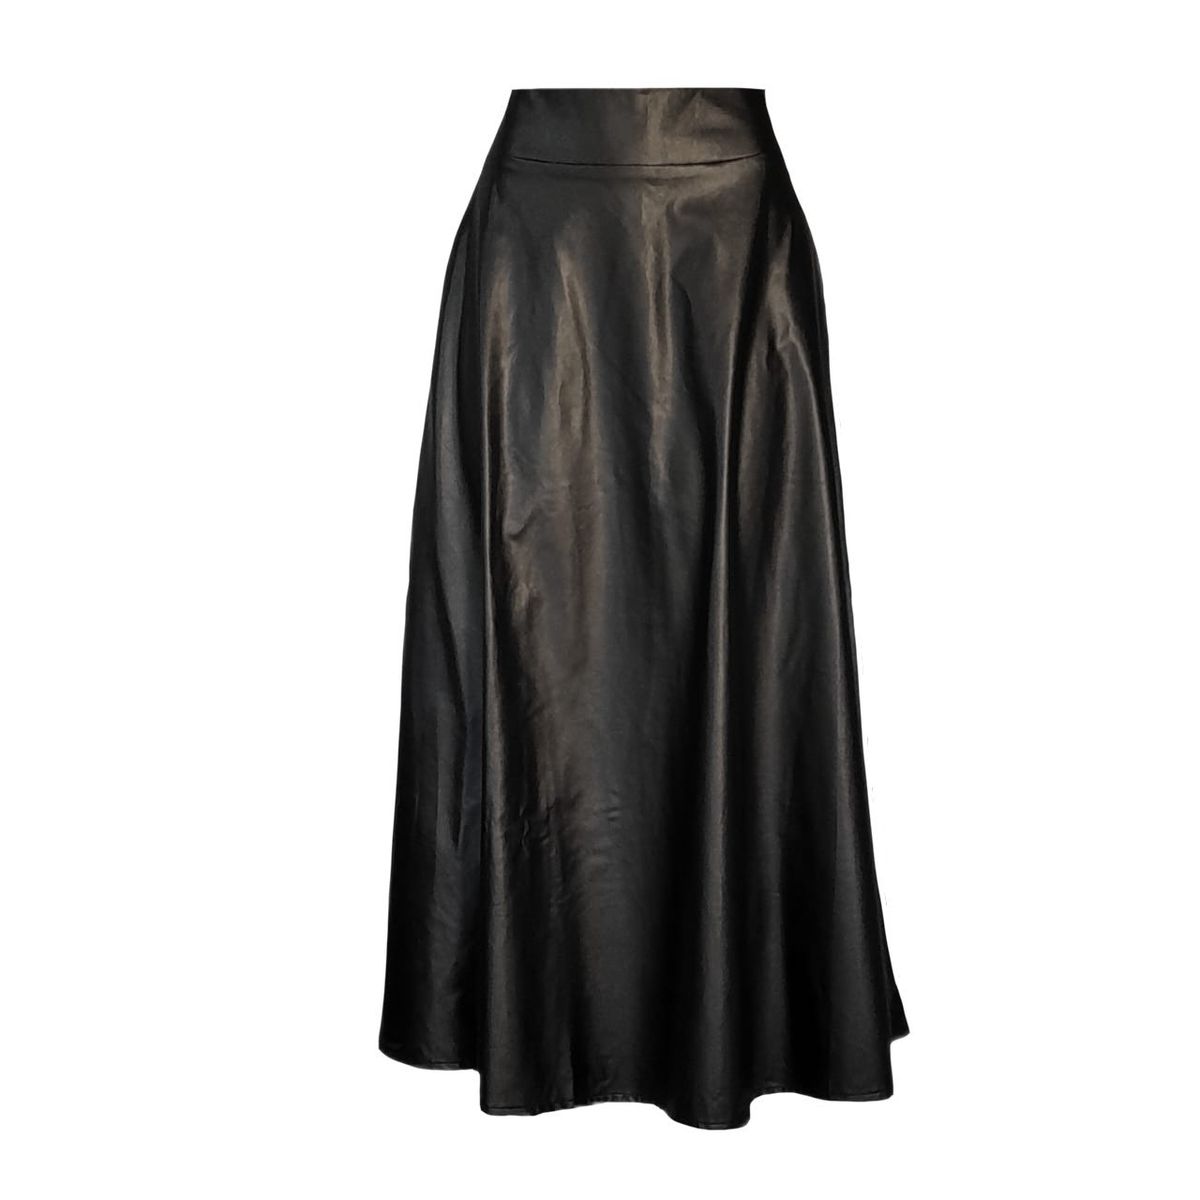 Women's Black Leather (PU) Ankle Skirt | Shop Today. Get it Tomorrow ...